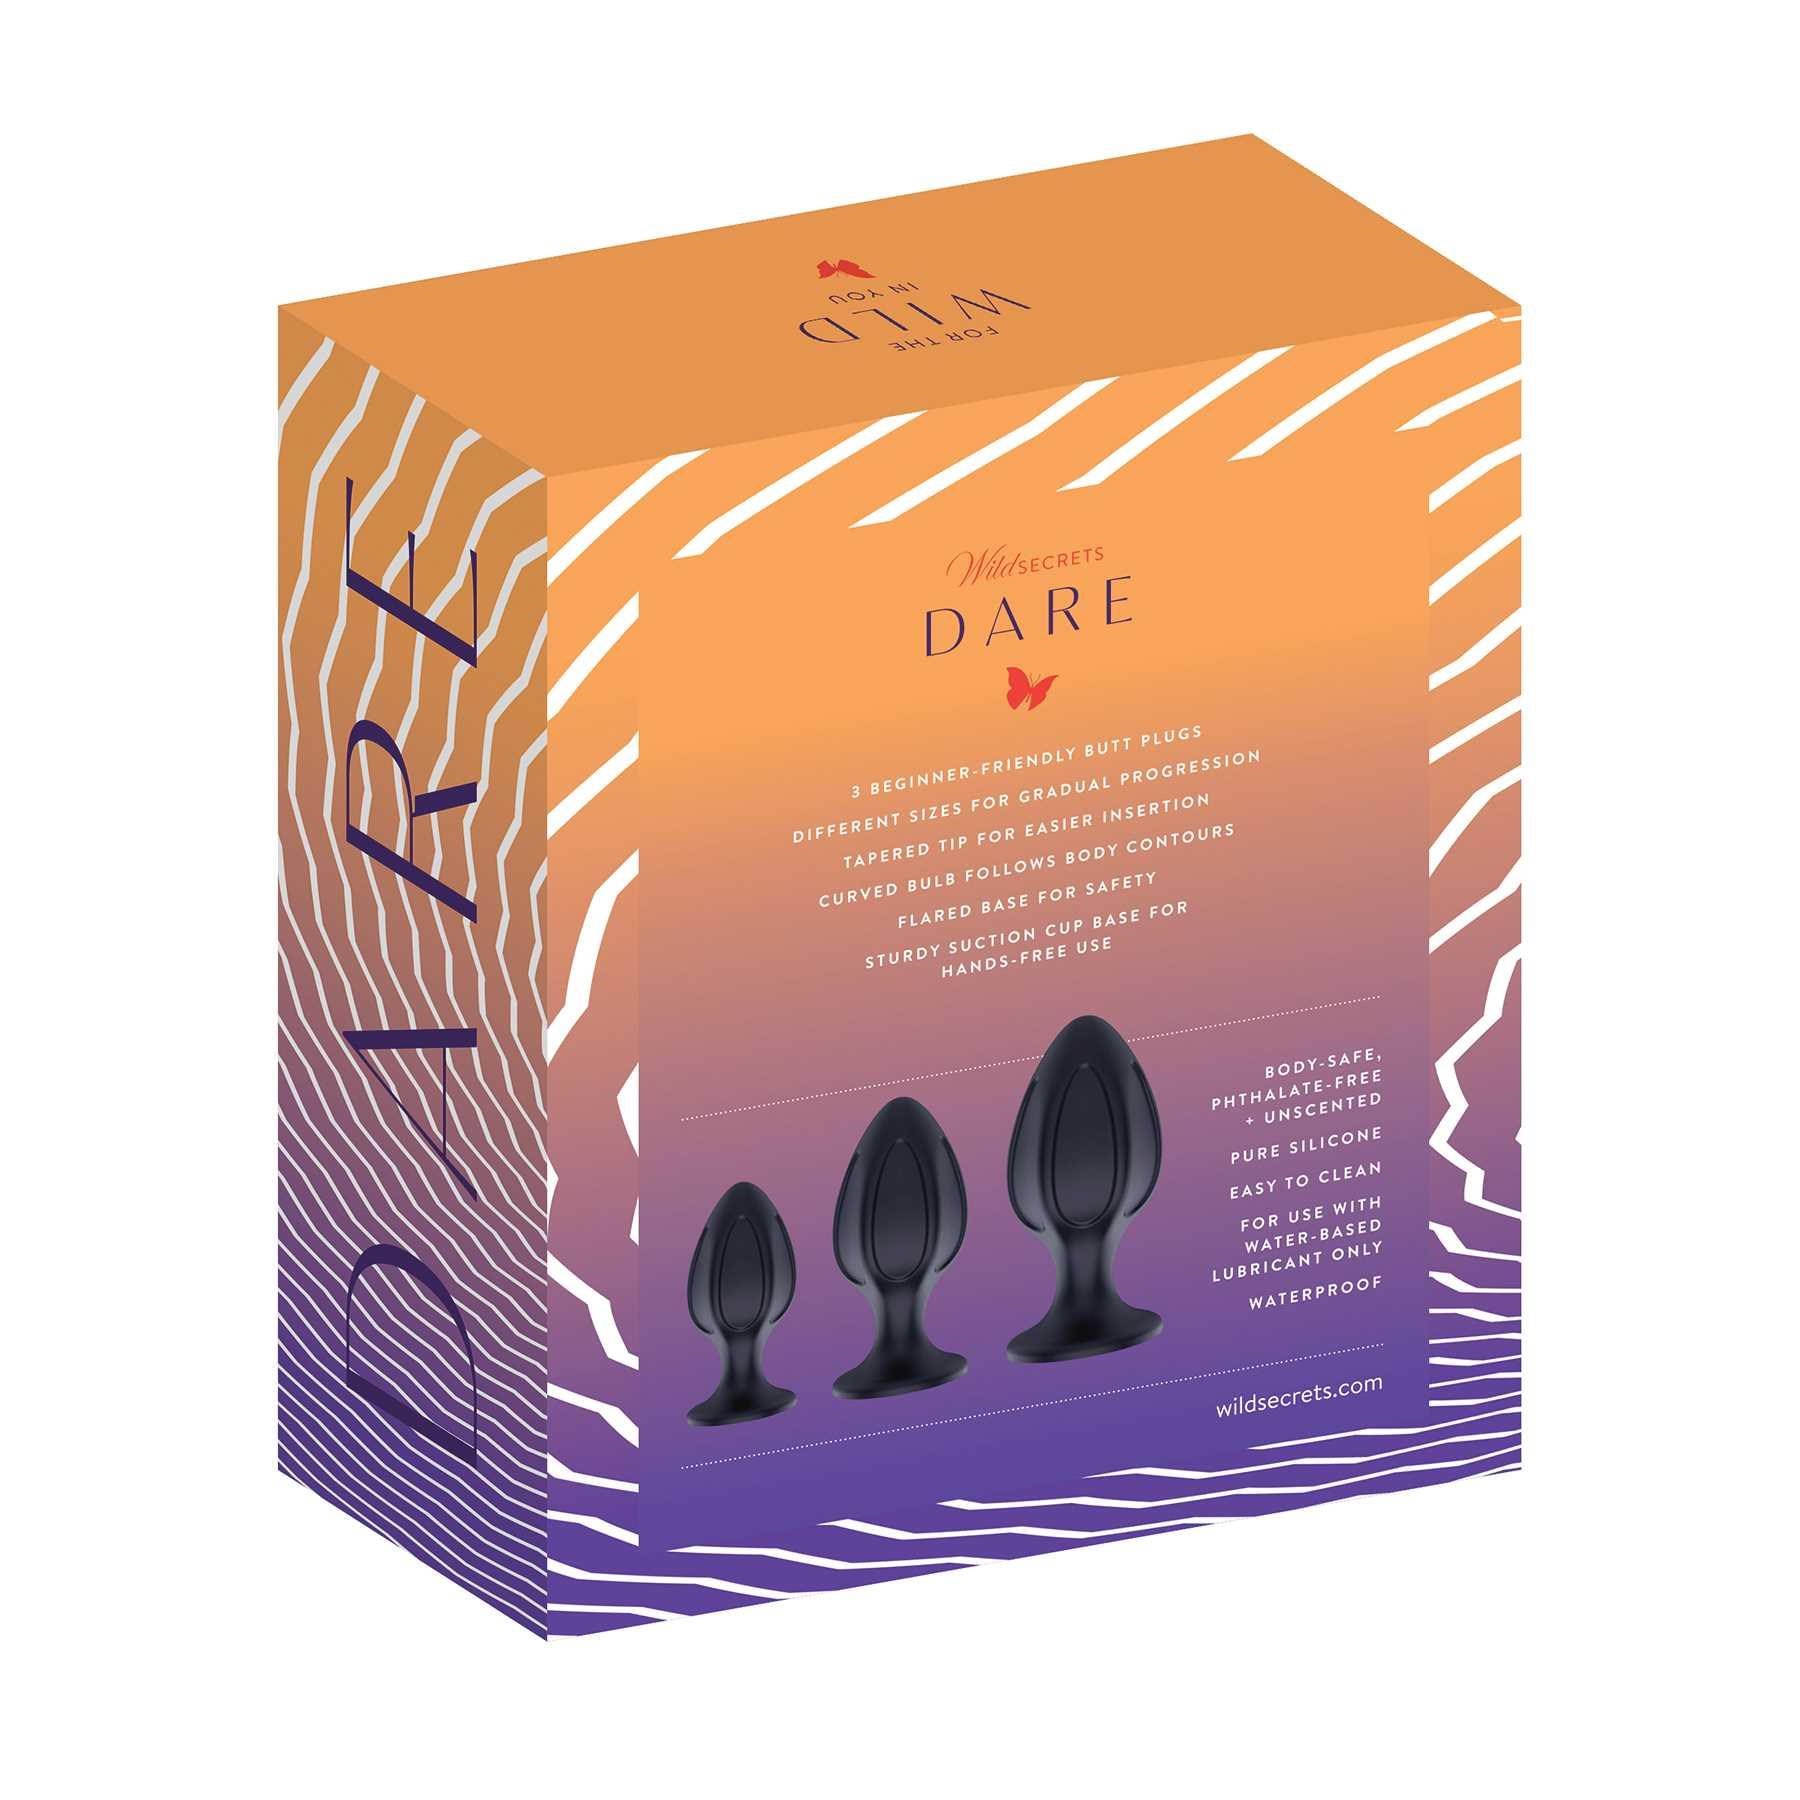 Wild Secrets Dare Silcone Anal Trainer Kit back box packaging